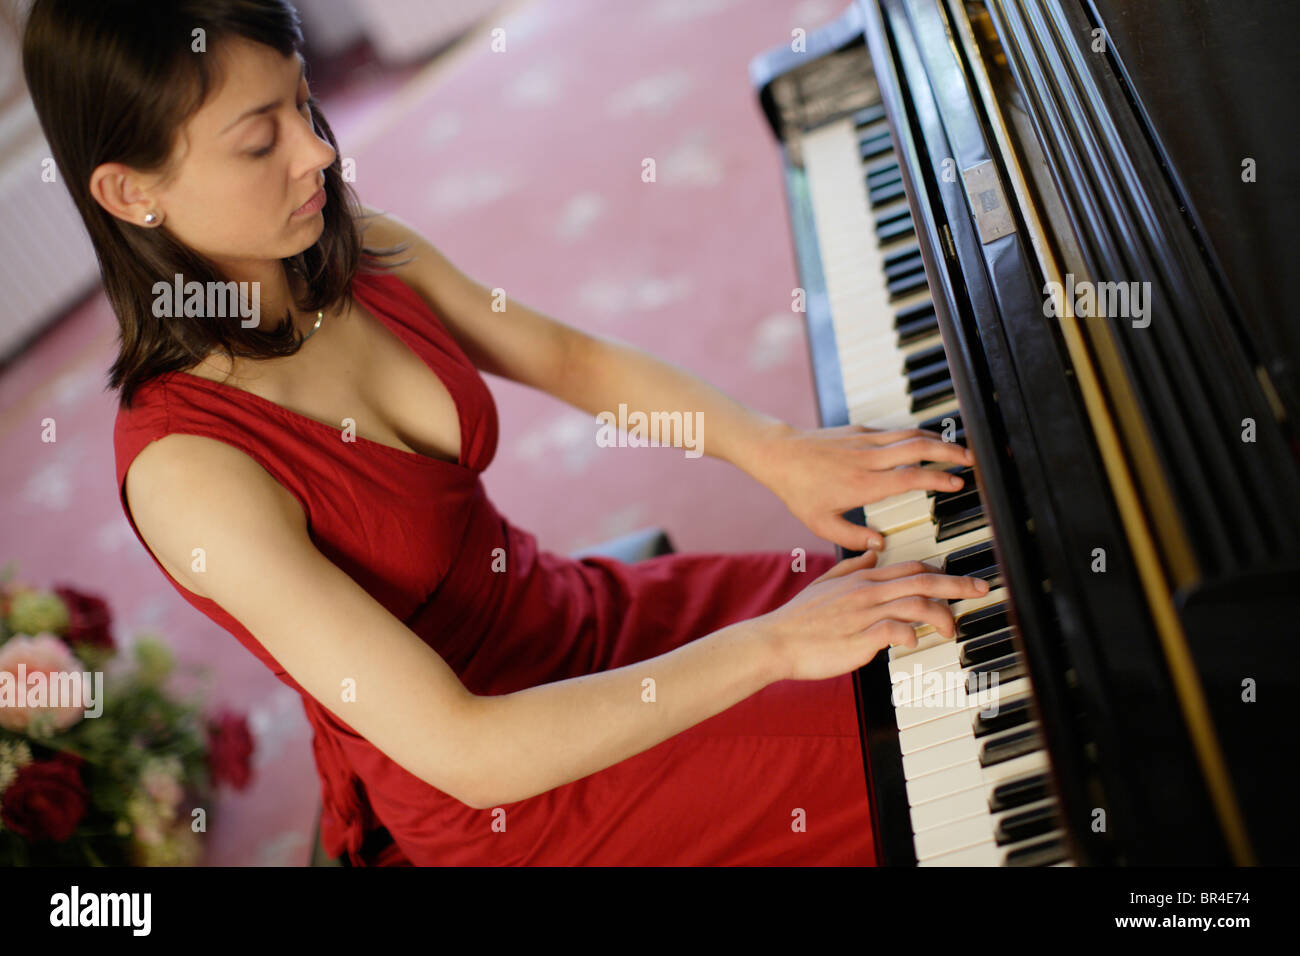 woman playing the piano Stock Photo